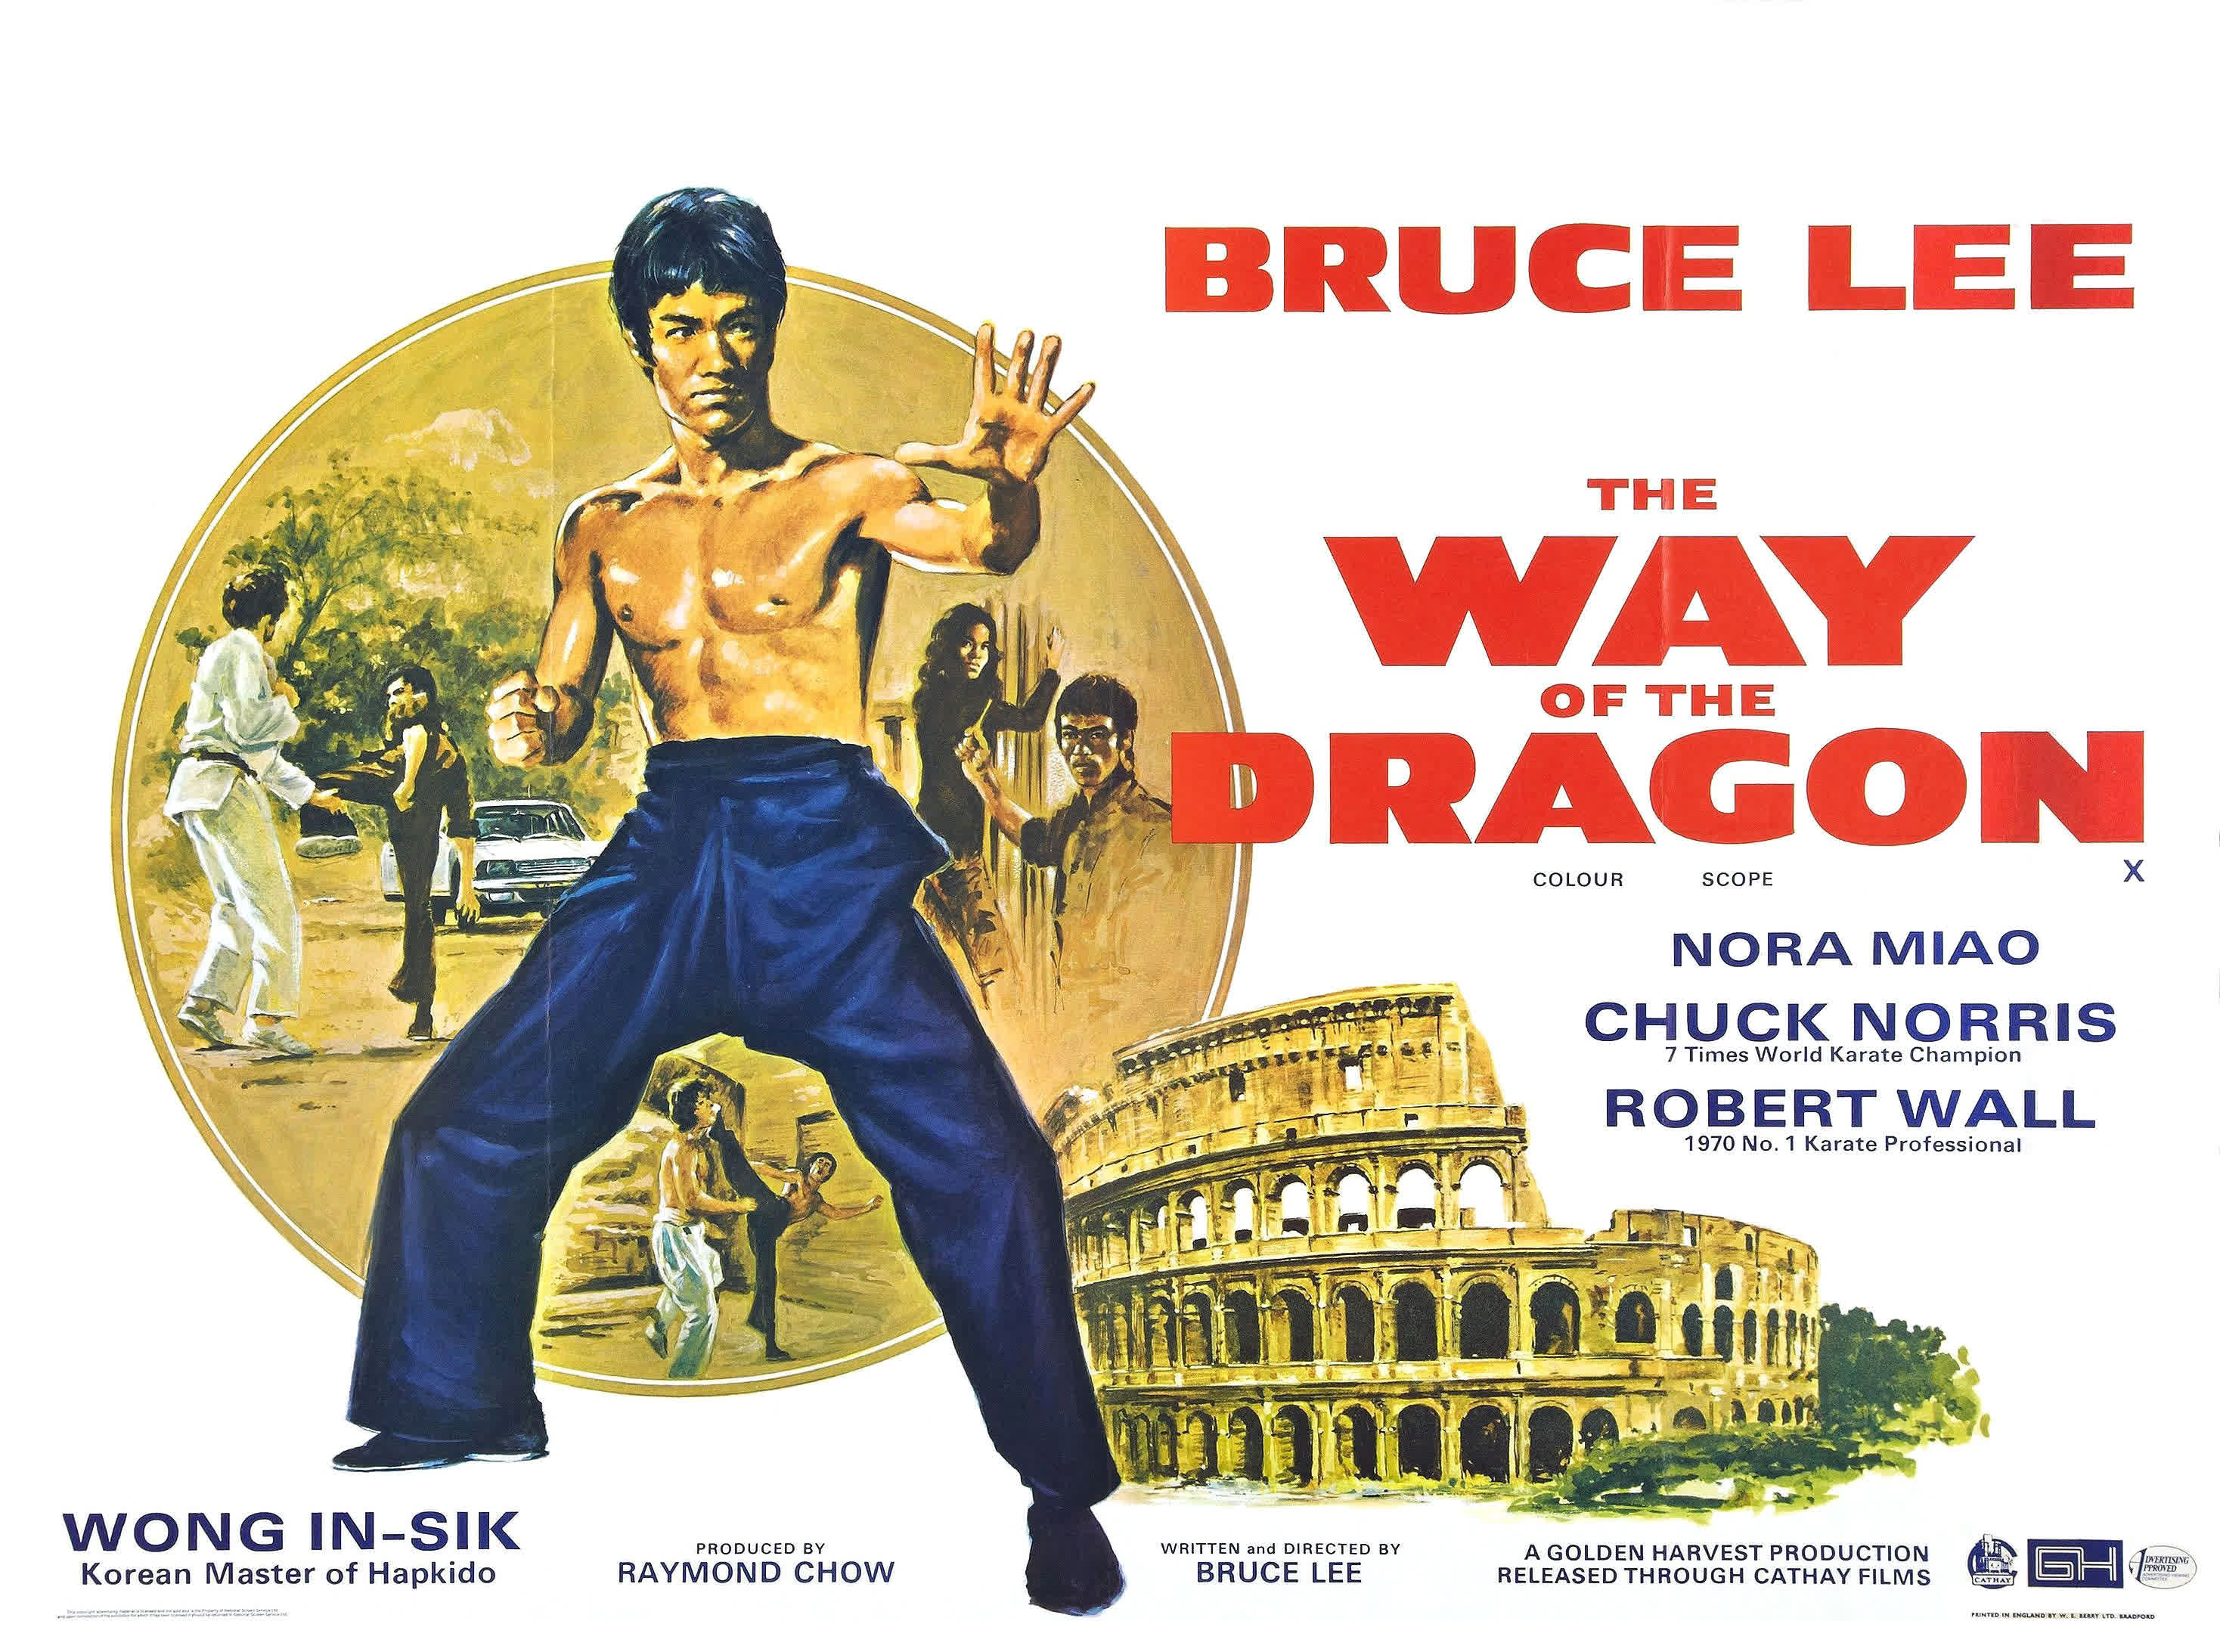 the way of the dragon, movie, bruce lee, poster 4K Ultra